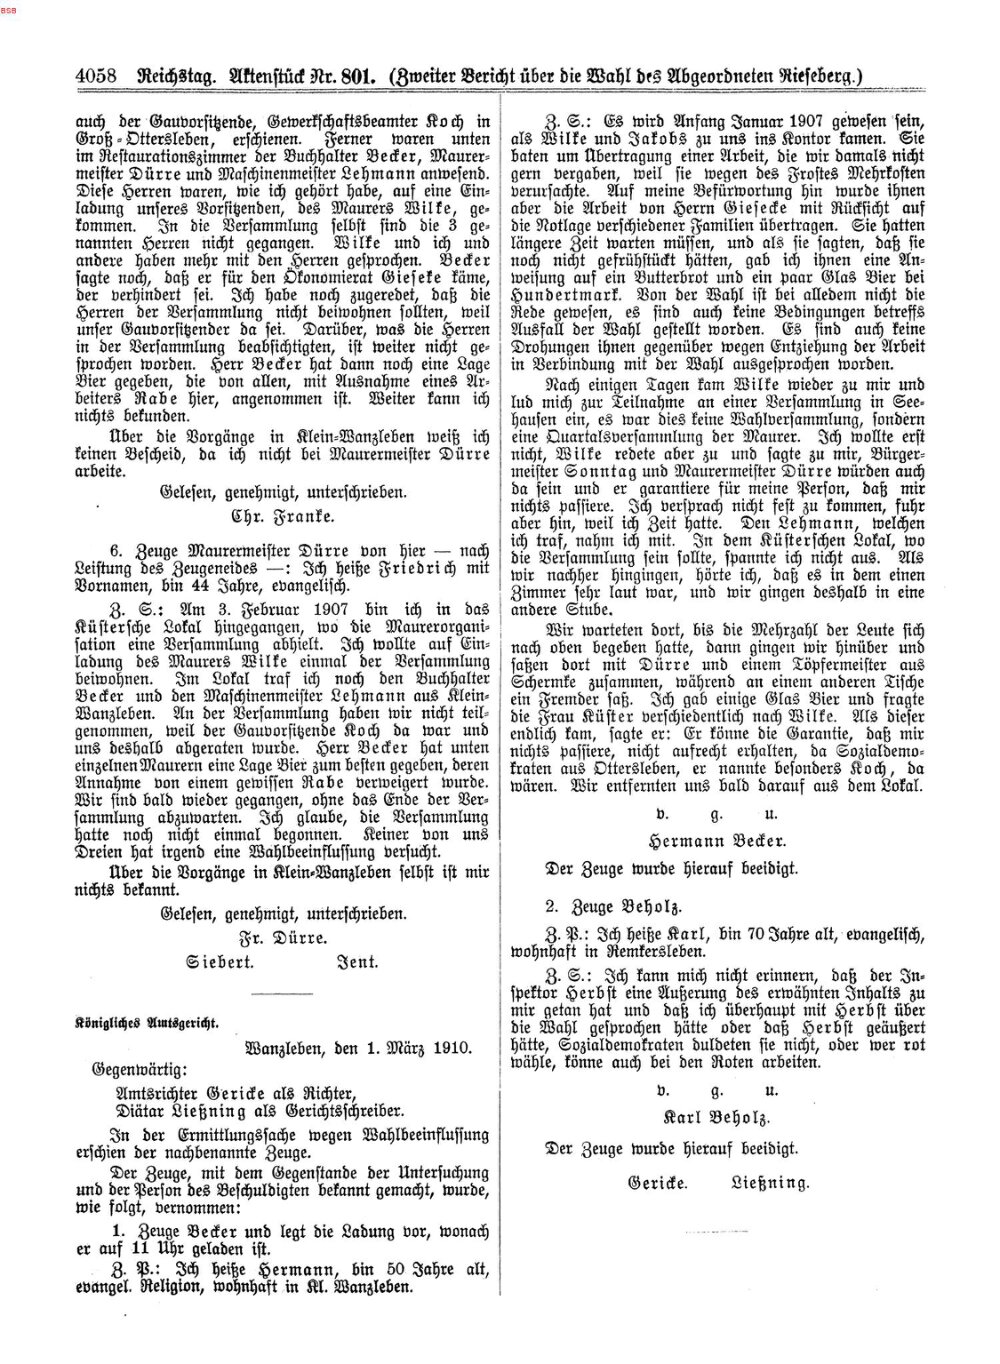 Scan of page 4058